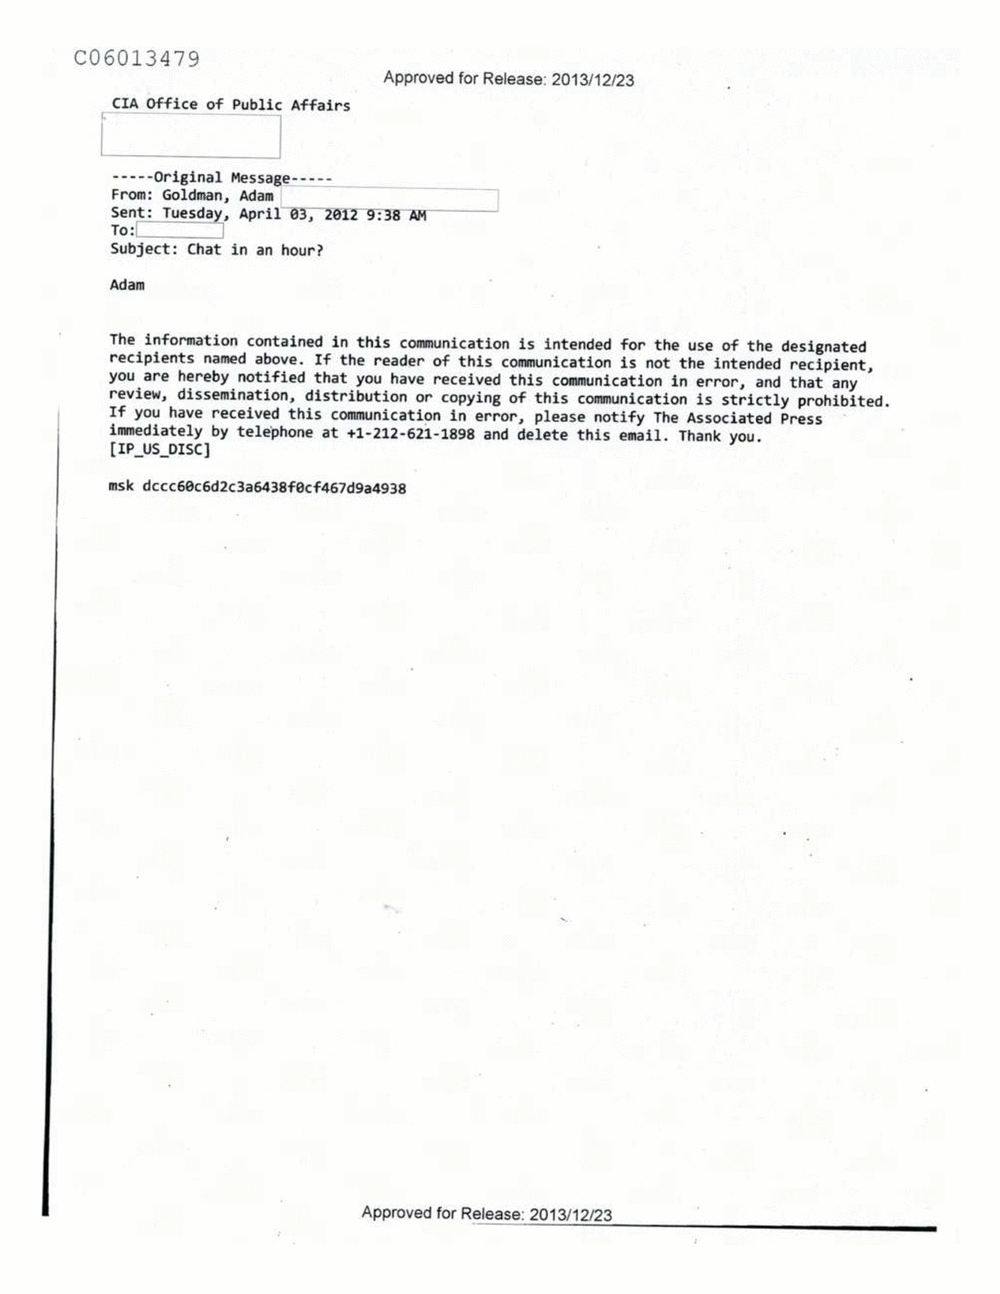 Page 331 from Email Correspondence Between Reporters and CIA Flacks